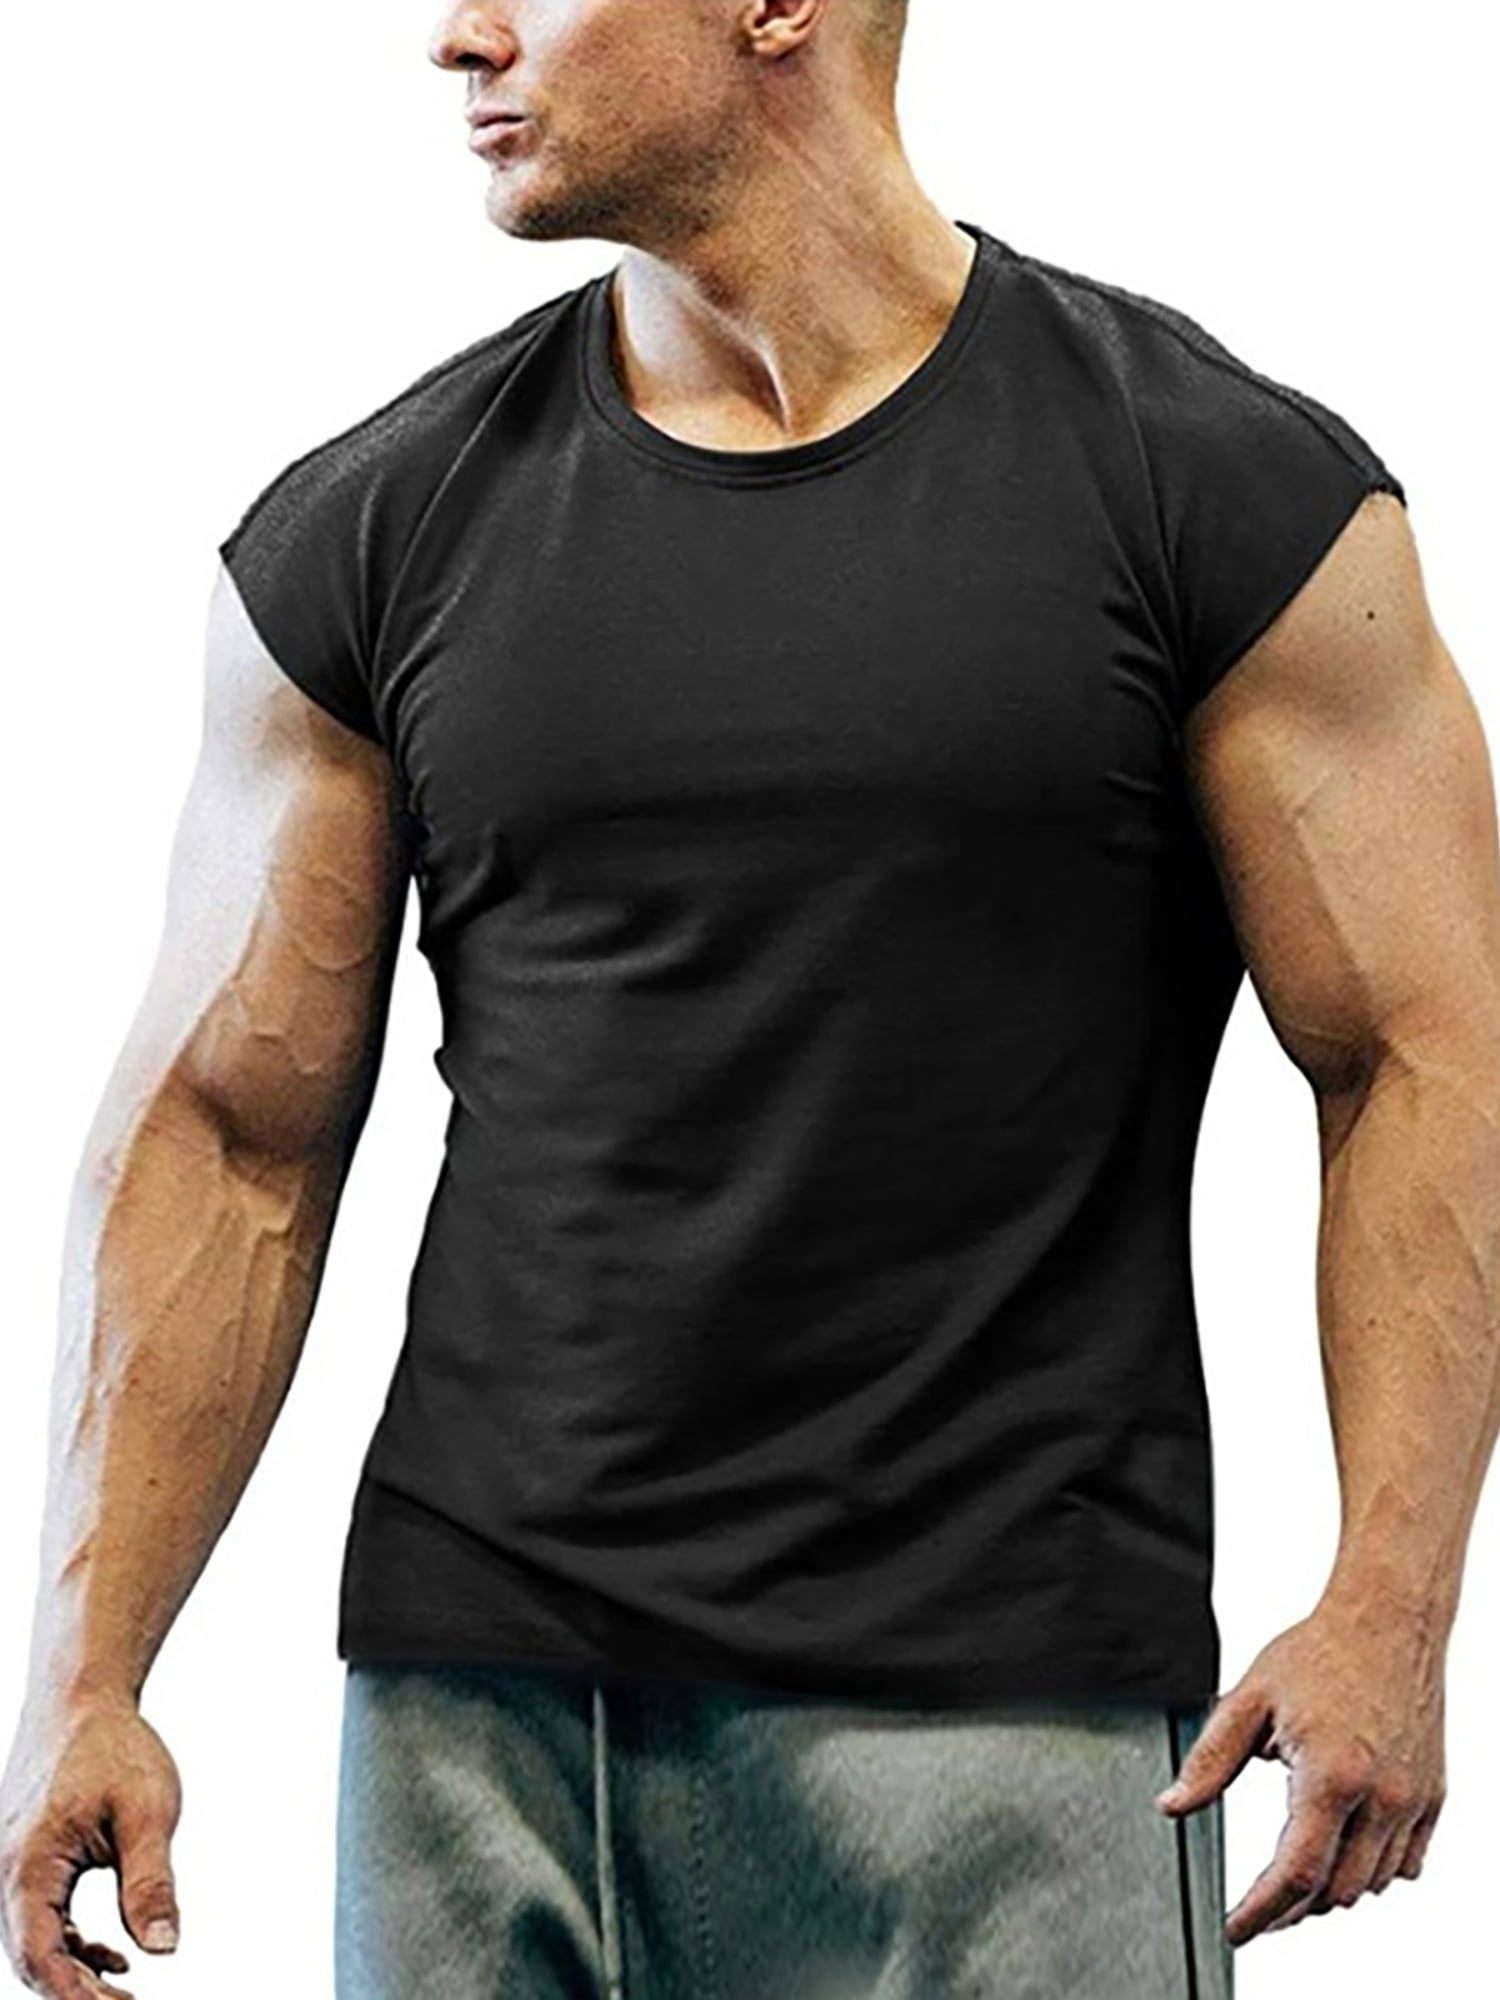 Men's Compression Shirt Short Sleeve Base Layer Tops Muscle T-shirt Gym Clothes 